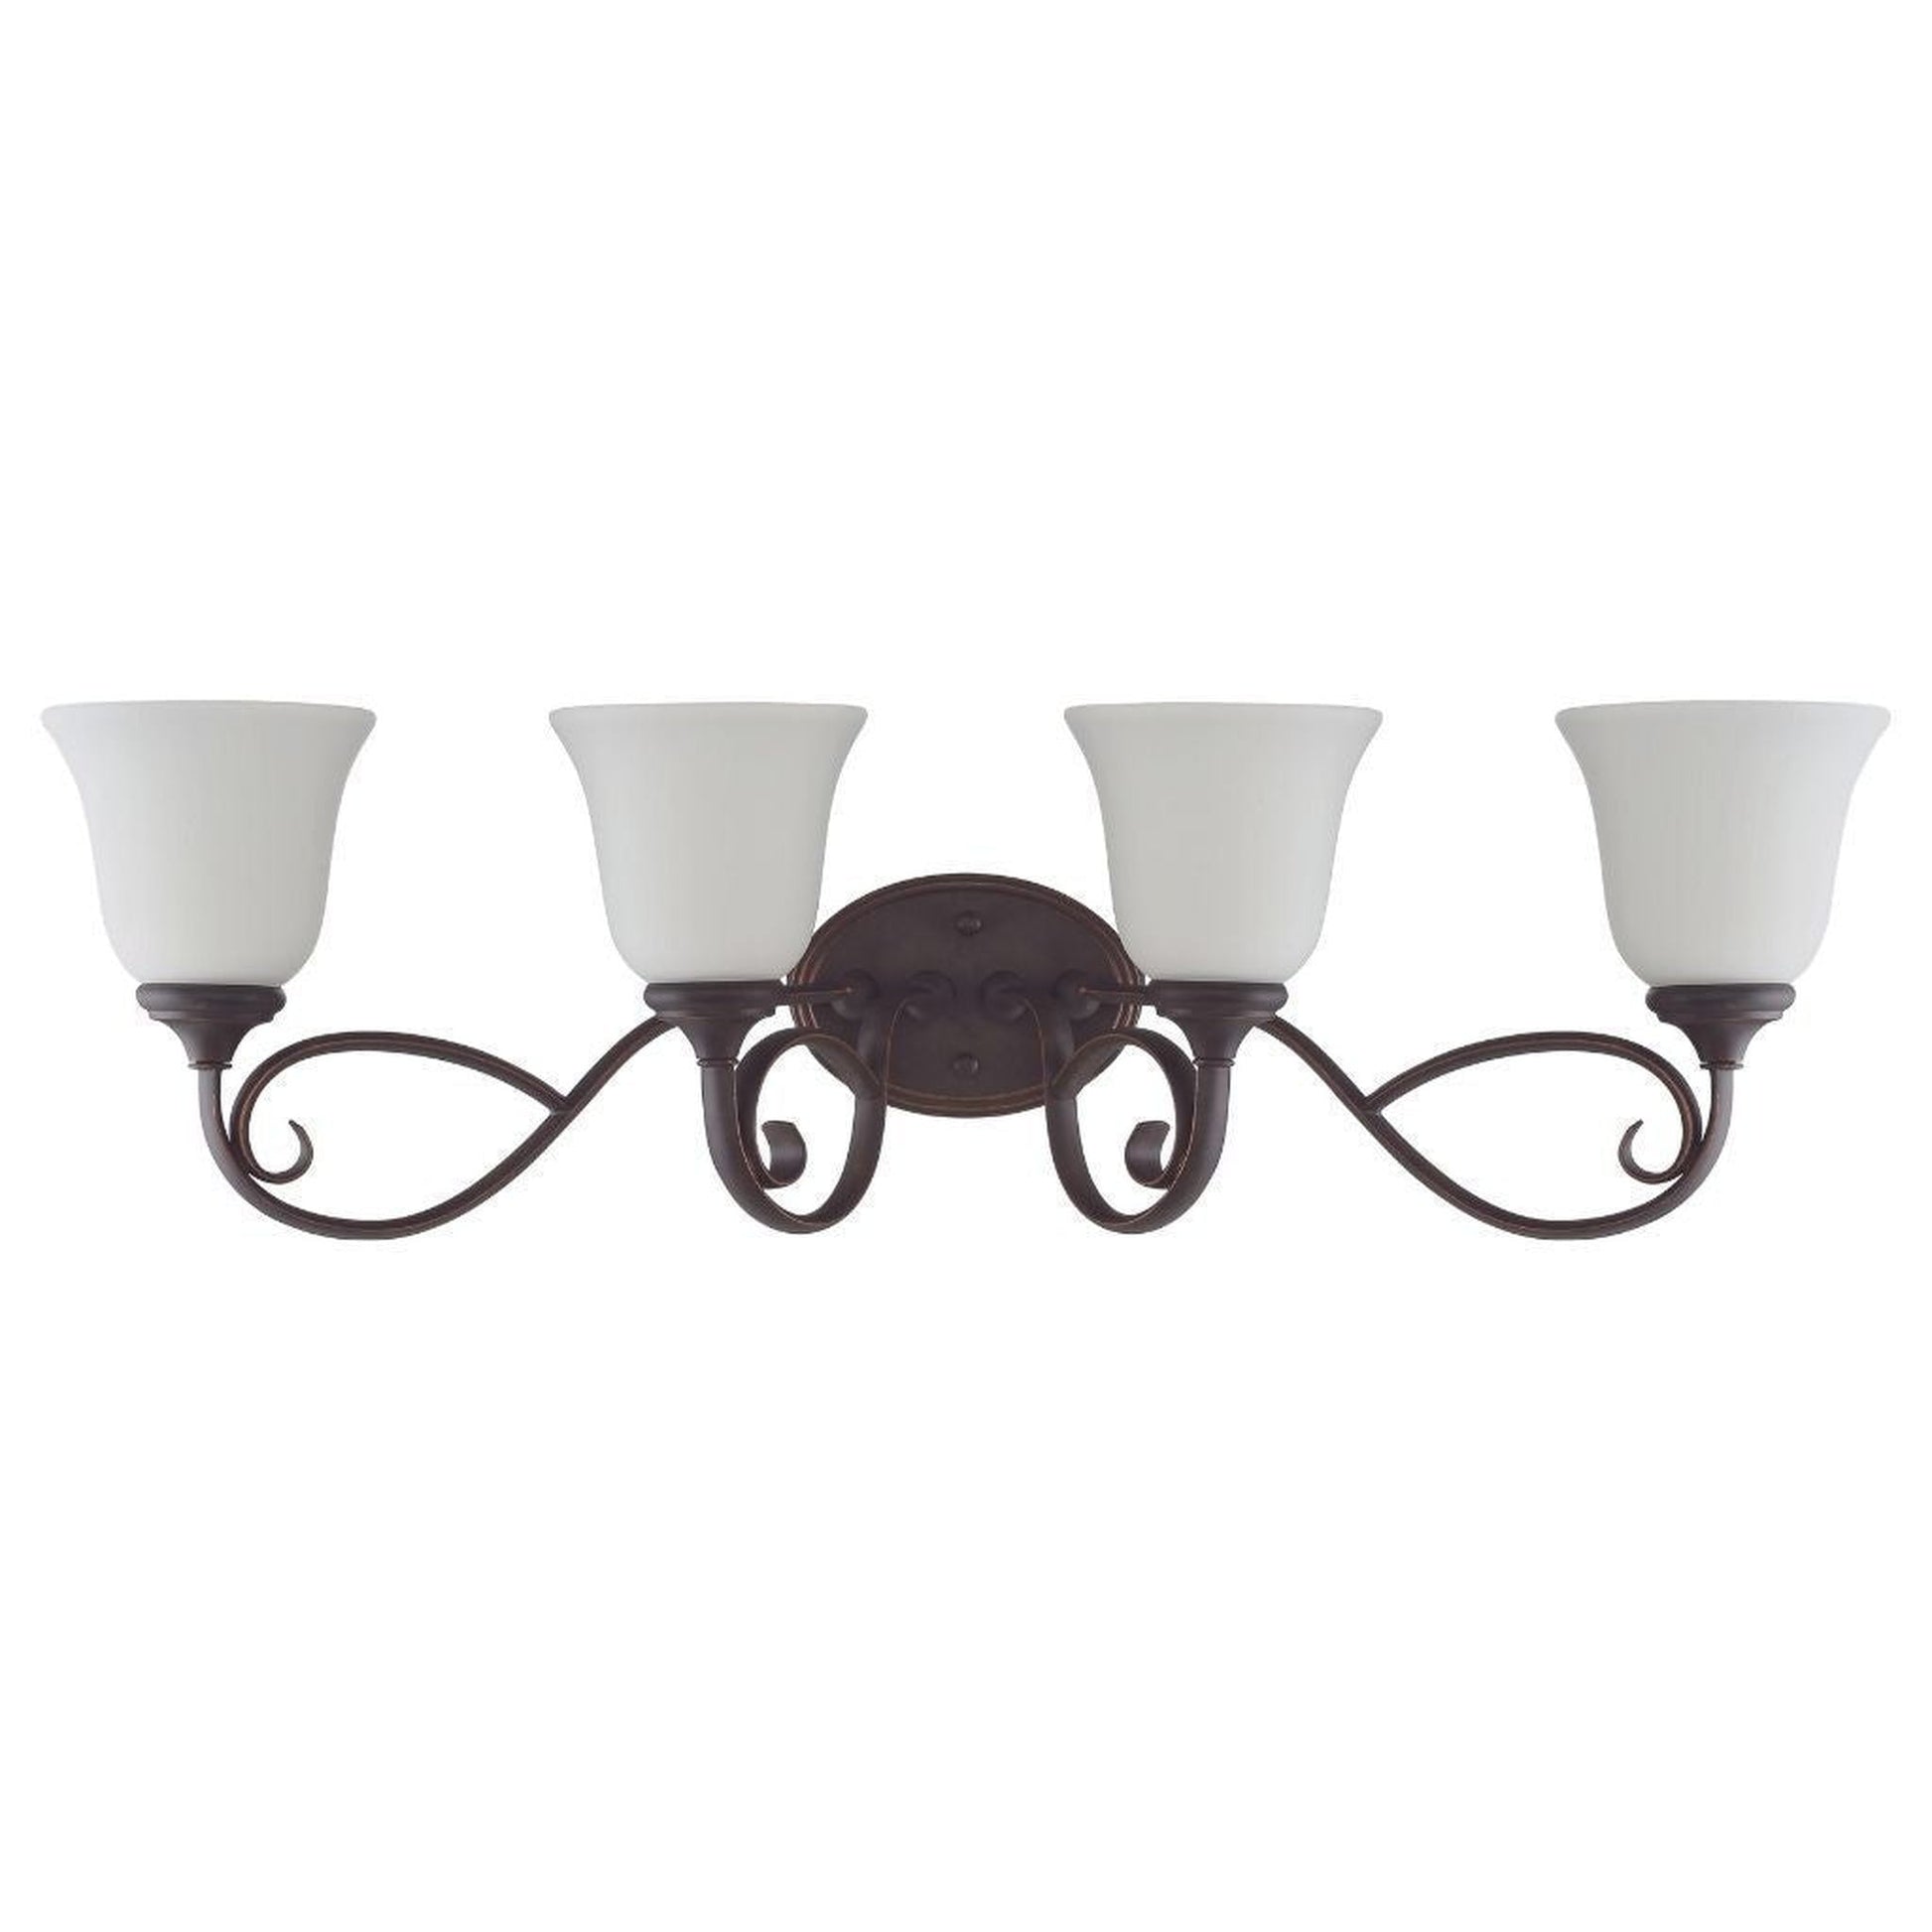 Craftmade Barrett Place 33" 4-Light Mocha Bronze Vanity Light With White Frosted Glass Shades